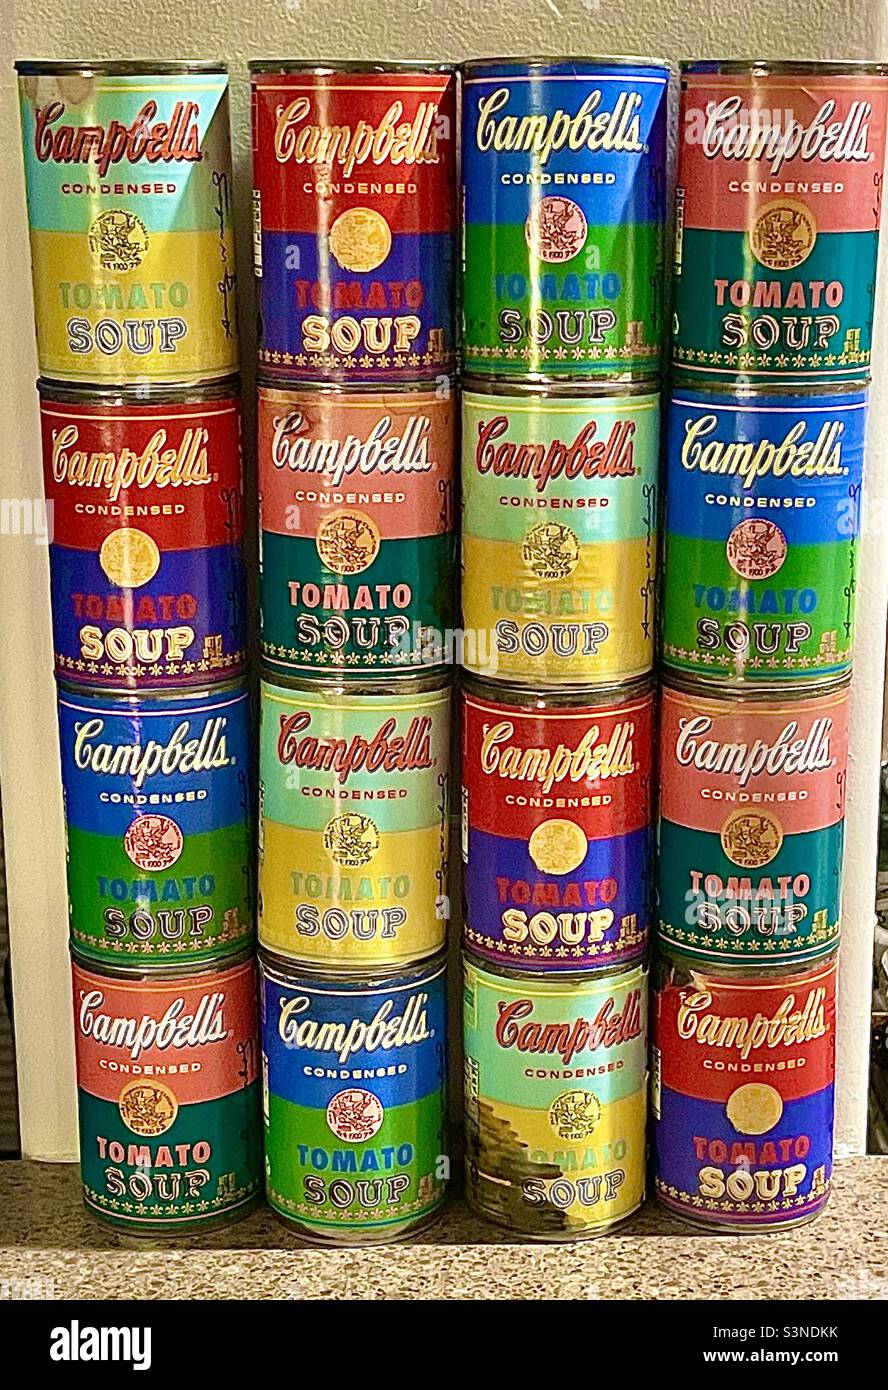 A bit worn collection/display of a dozen Warhol-styled Campbell soup cans, unopened and filled with soup. Cans were patterned after and sold specifically as Warhol memorabilia pop art. Stock Photo